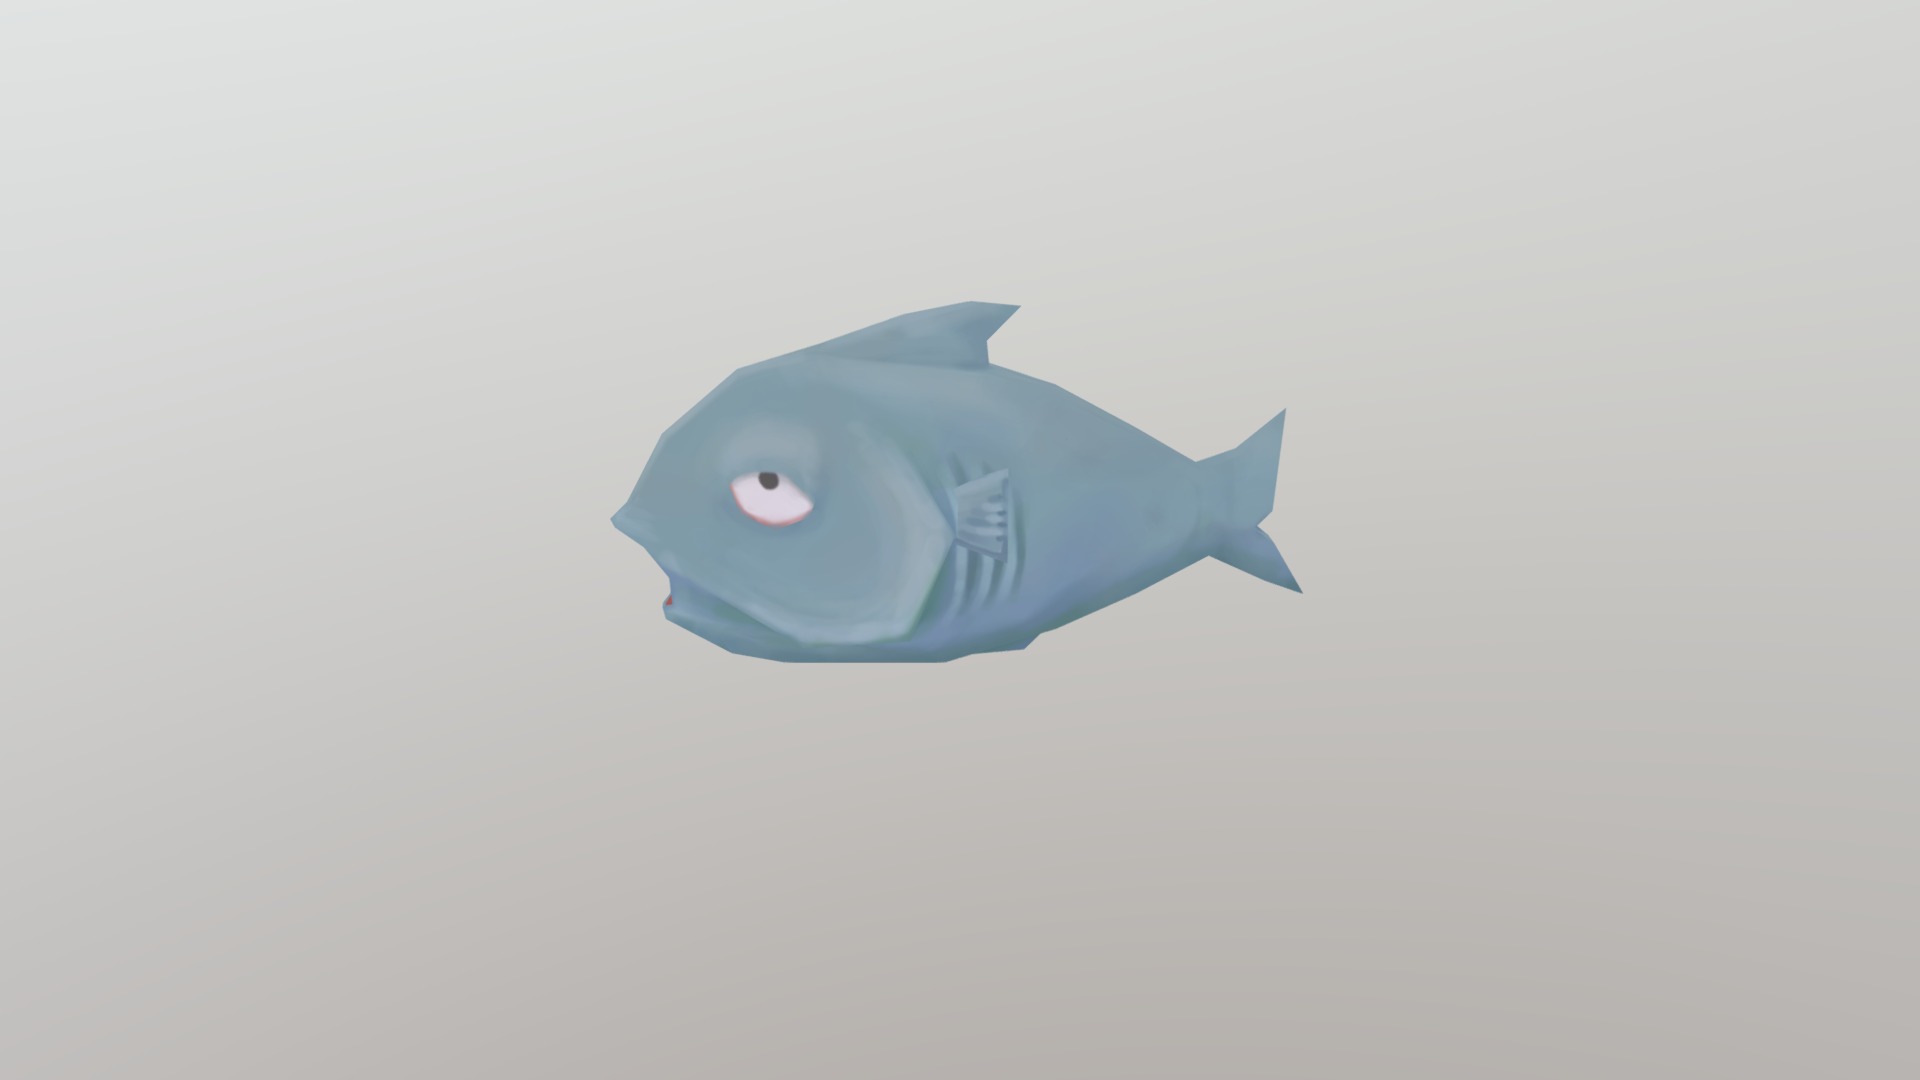 3D model dead Handpainted Fish - This is a 3D model of the dead Handpainted Fish. The 3D model is about a blue fish with a white background.